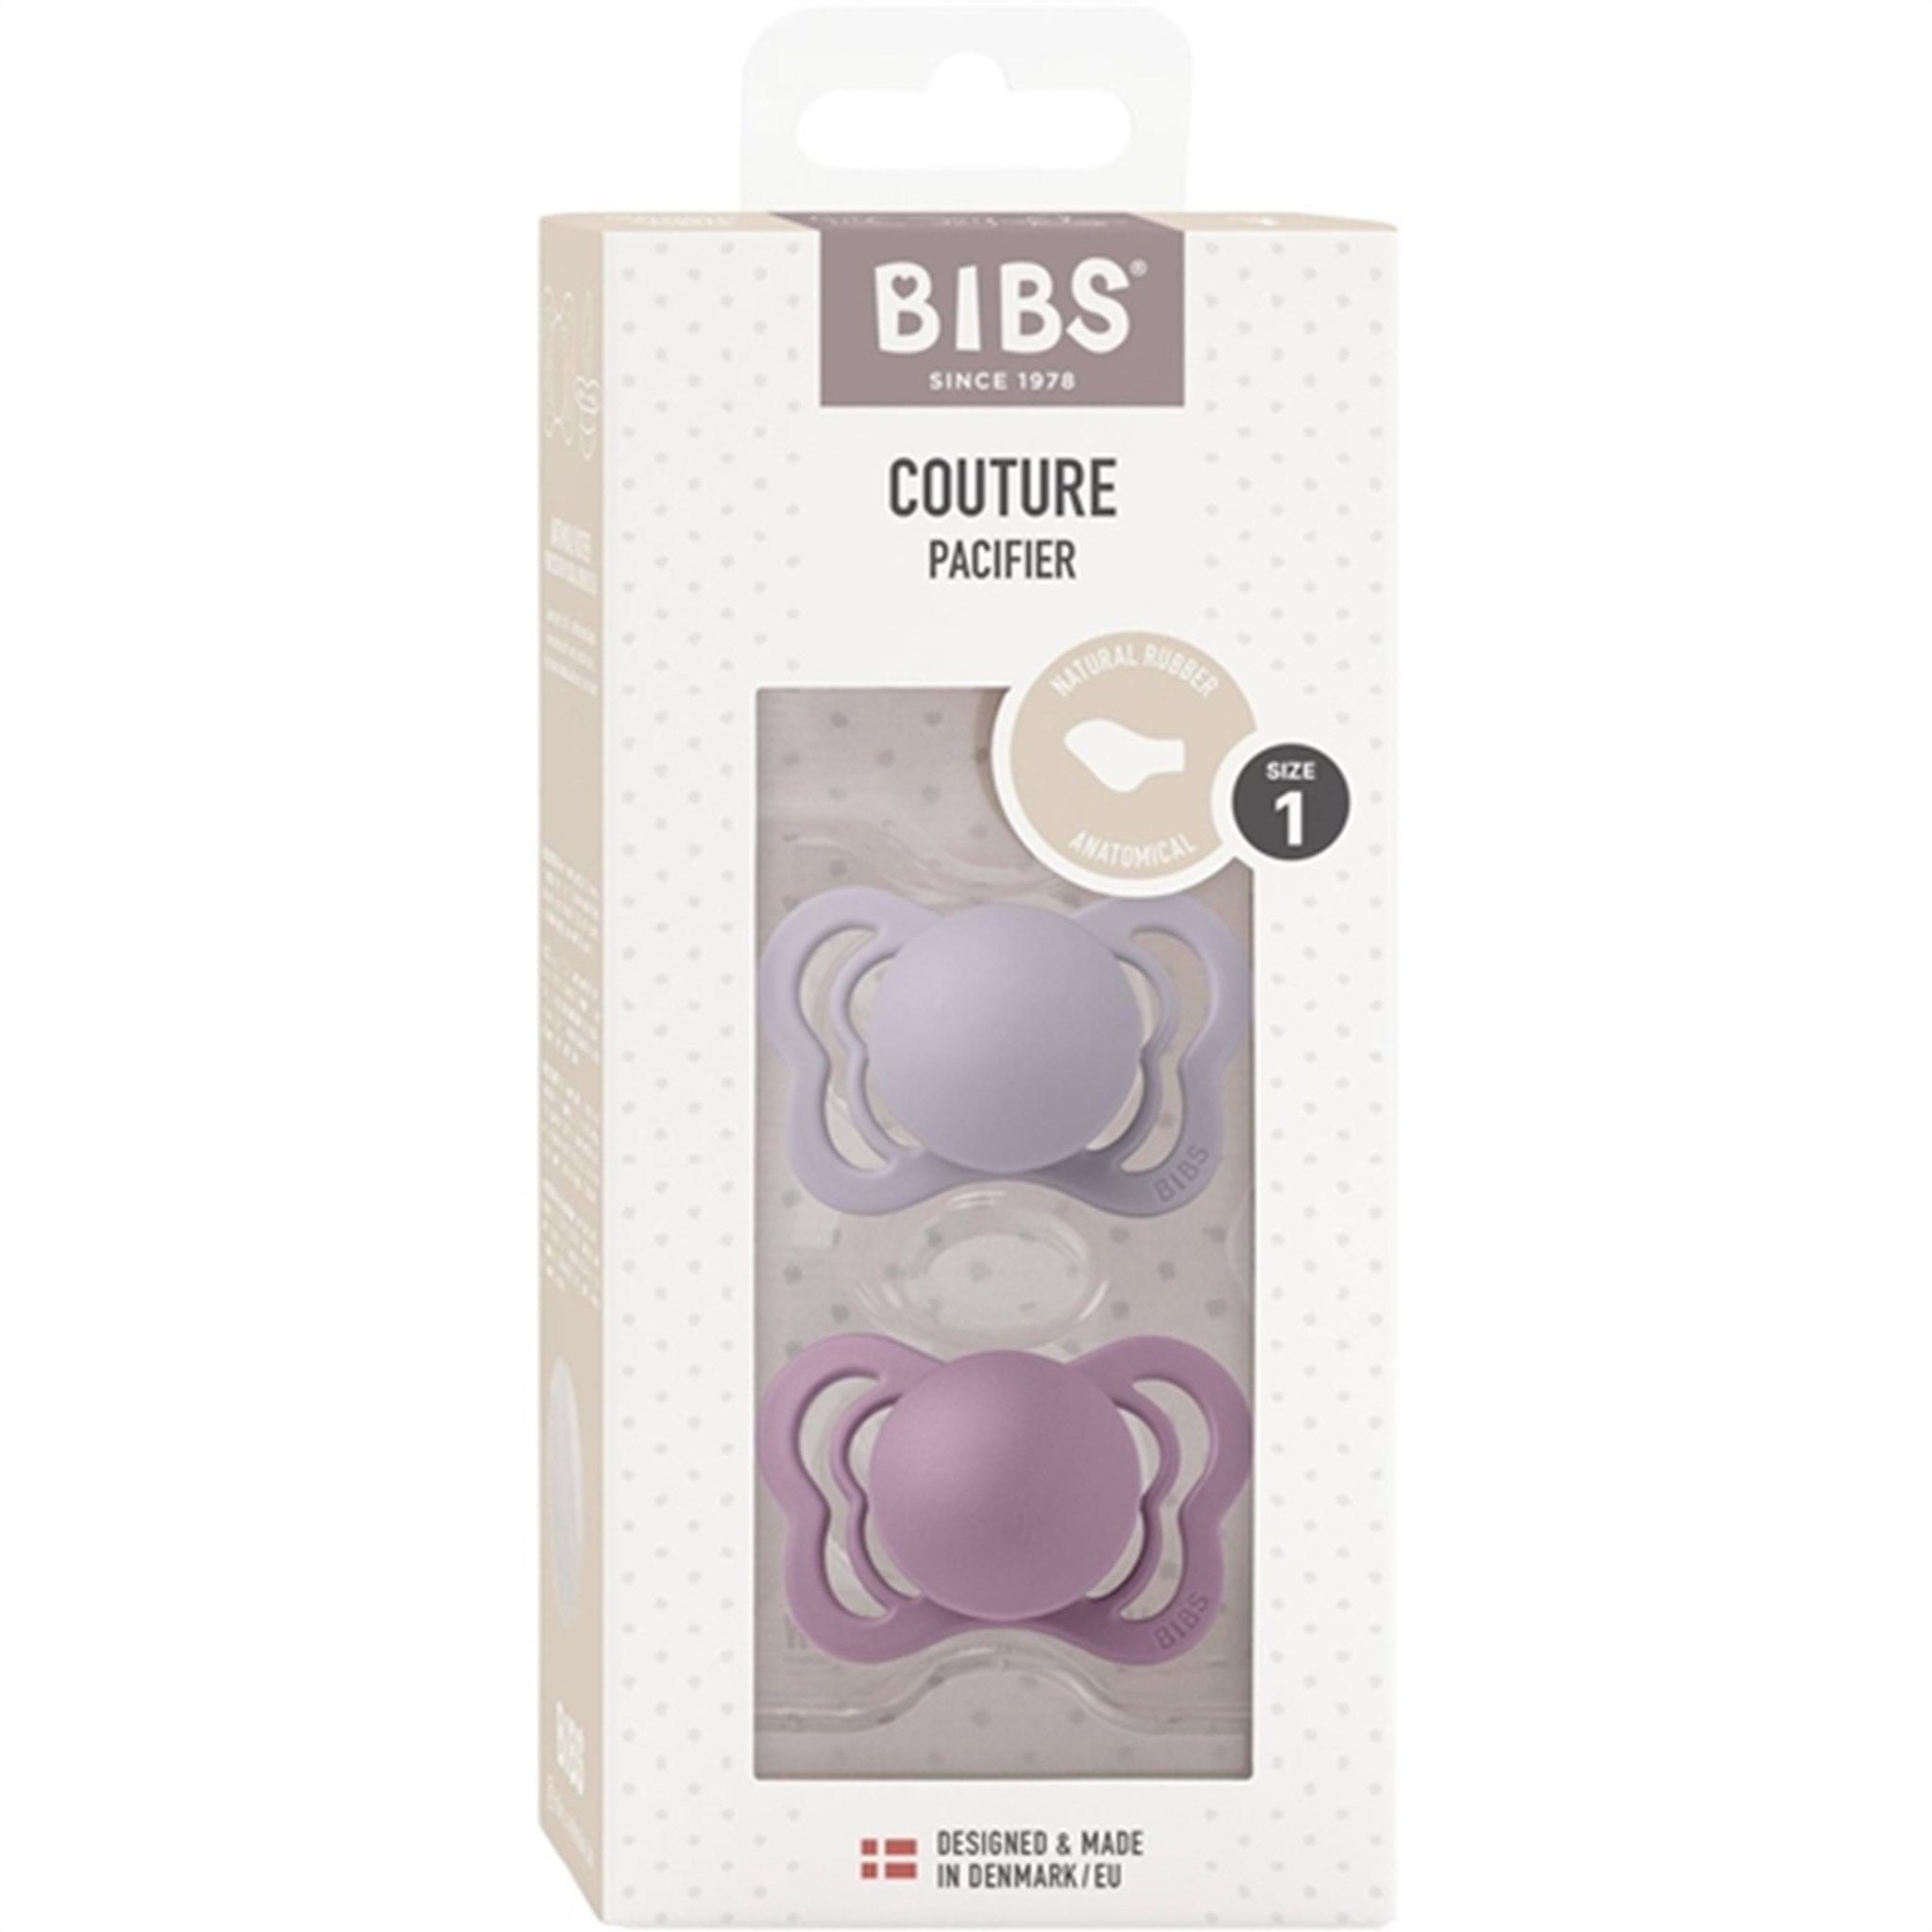 Bibs Couture Latex Pacifier 2-pack Fossil Grey/Mauve 2